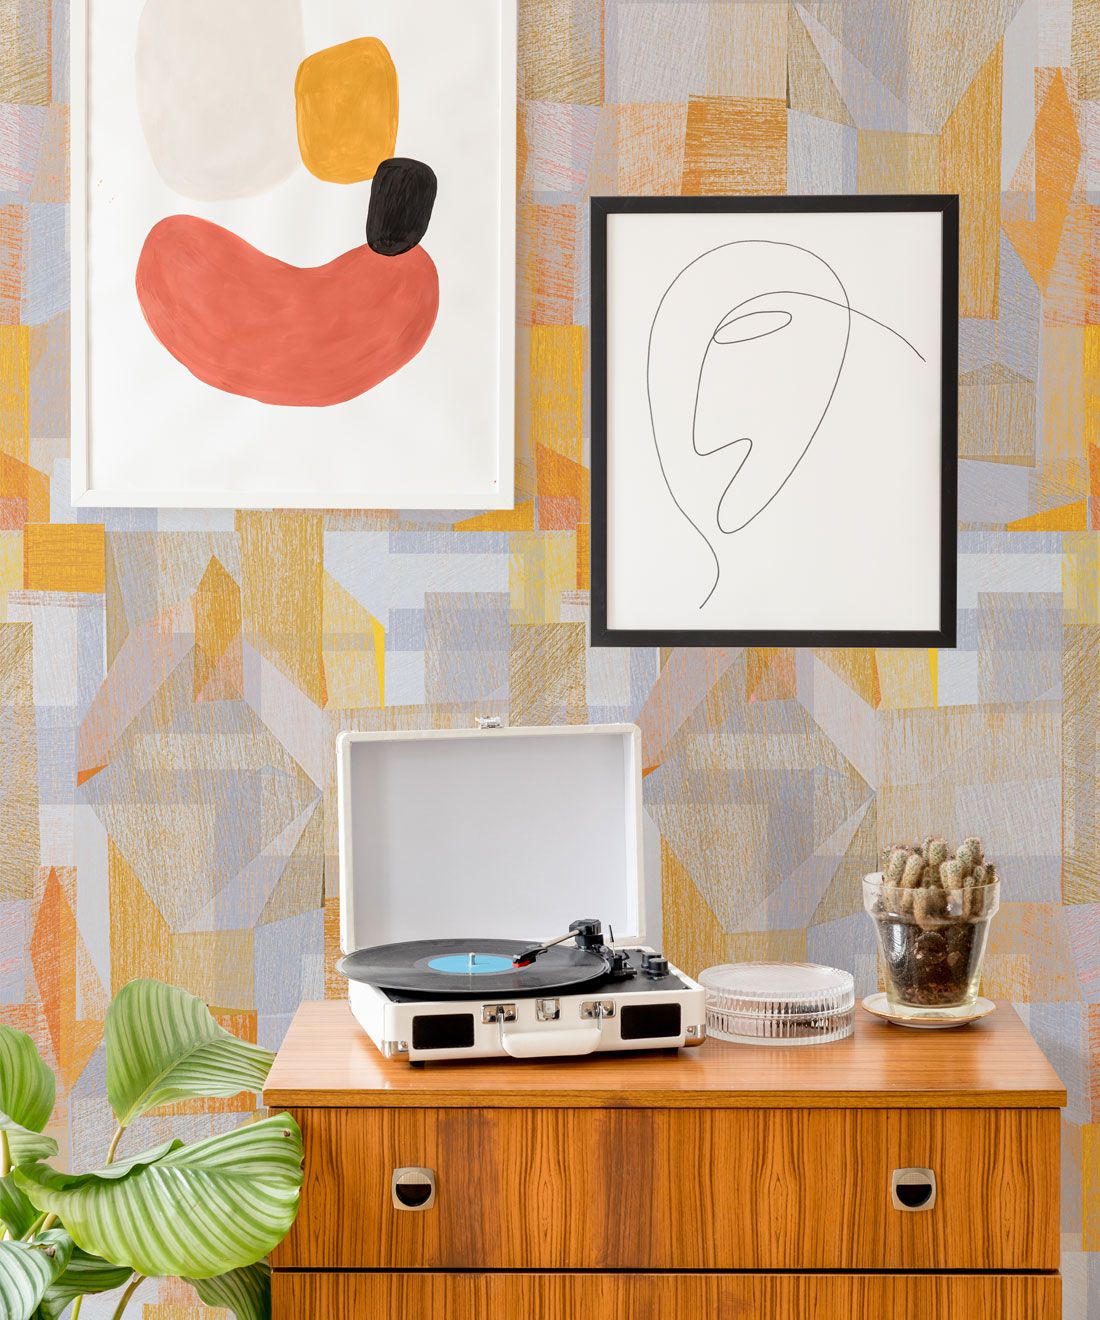 Chimera Wallpaper by Simcox • Color Yellow • Abstract Wallpaper • Geometric Wallpaper • insitu